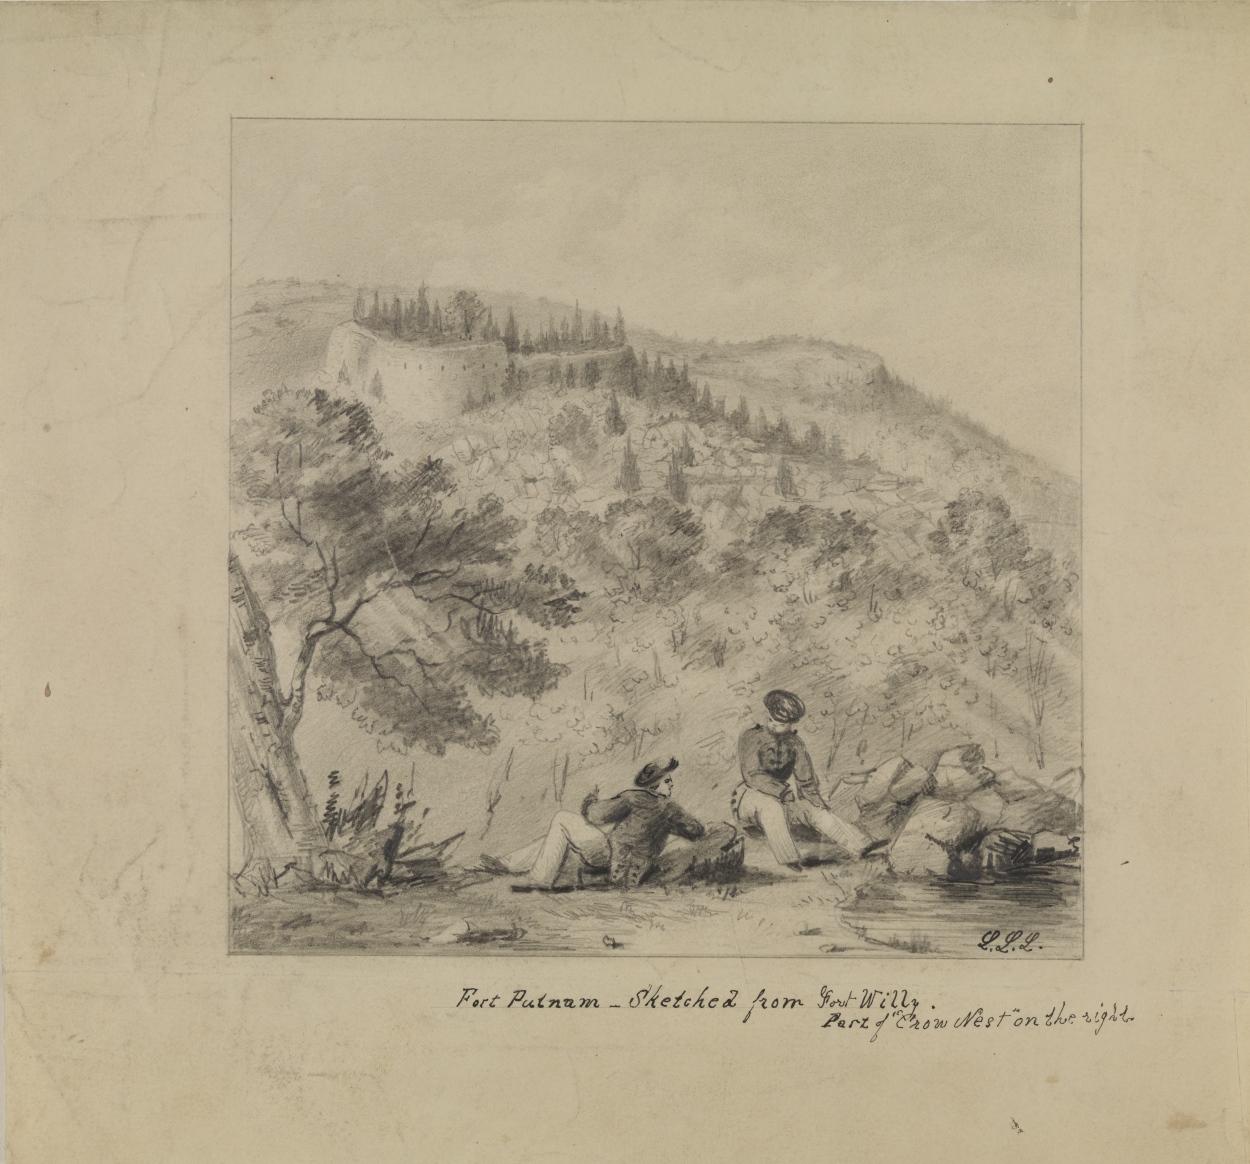 Fort Putman - Sketched from Fort Willy